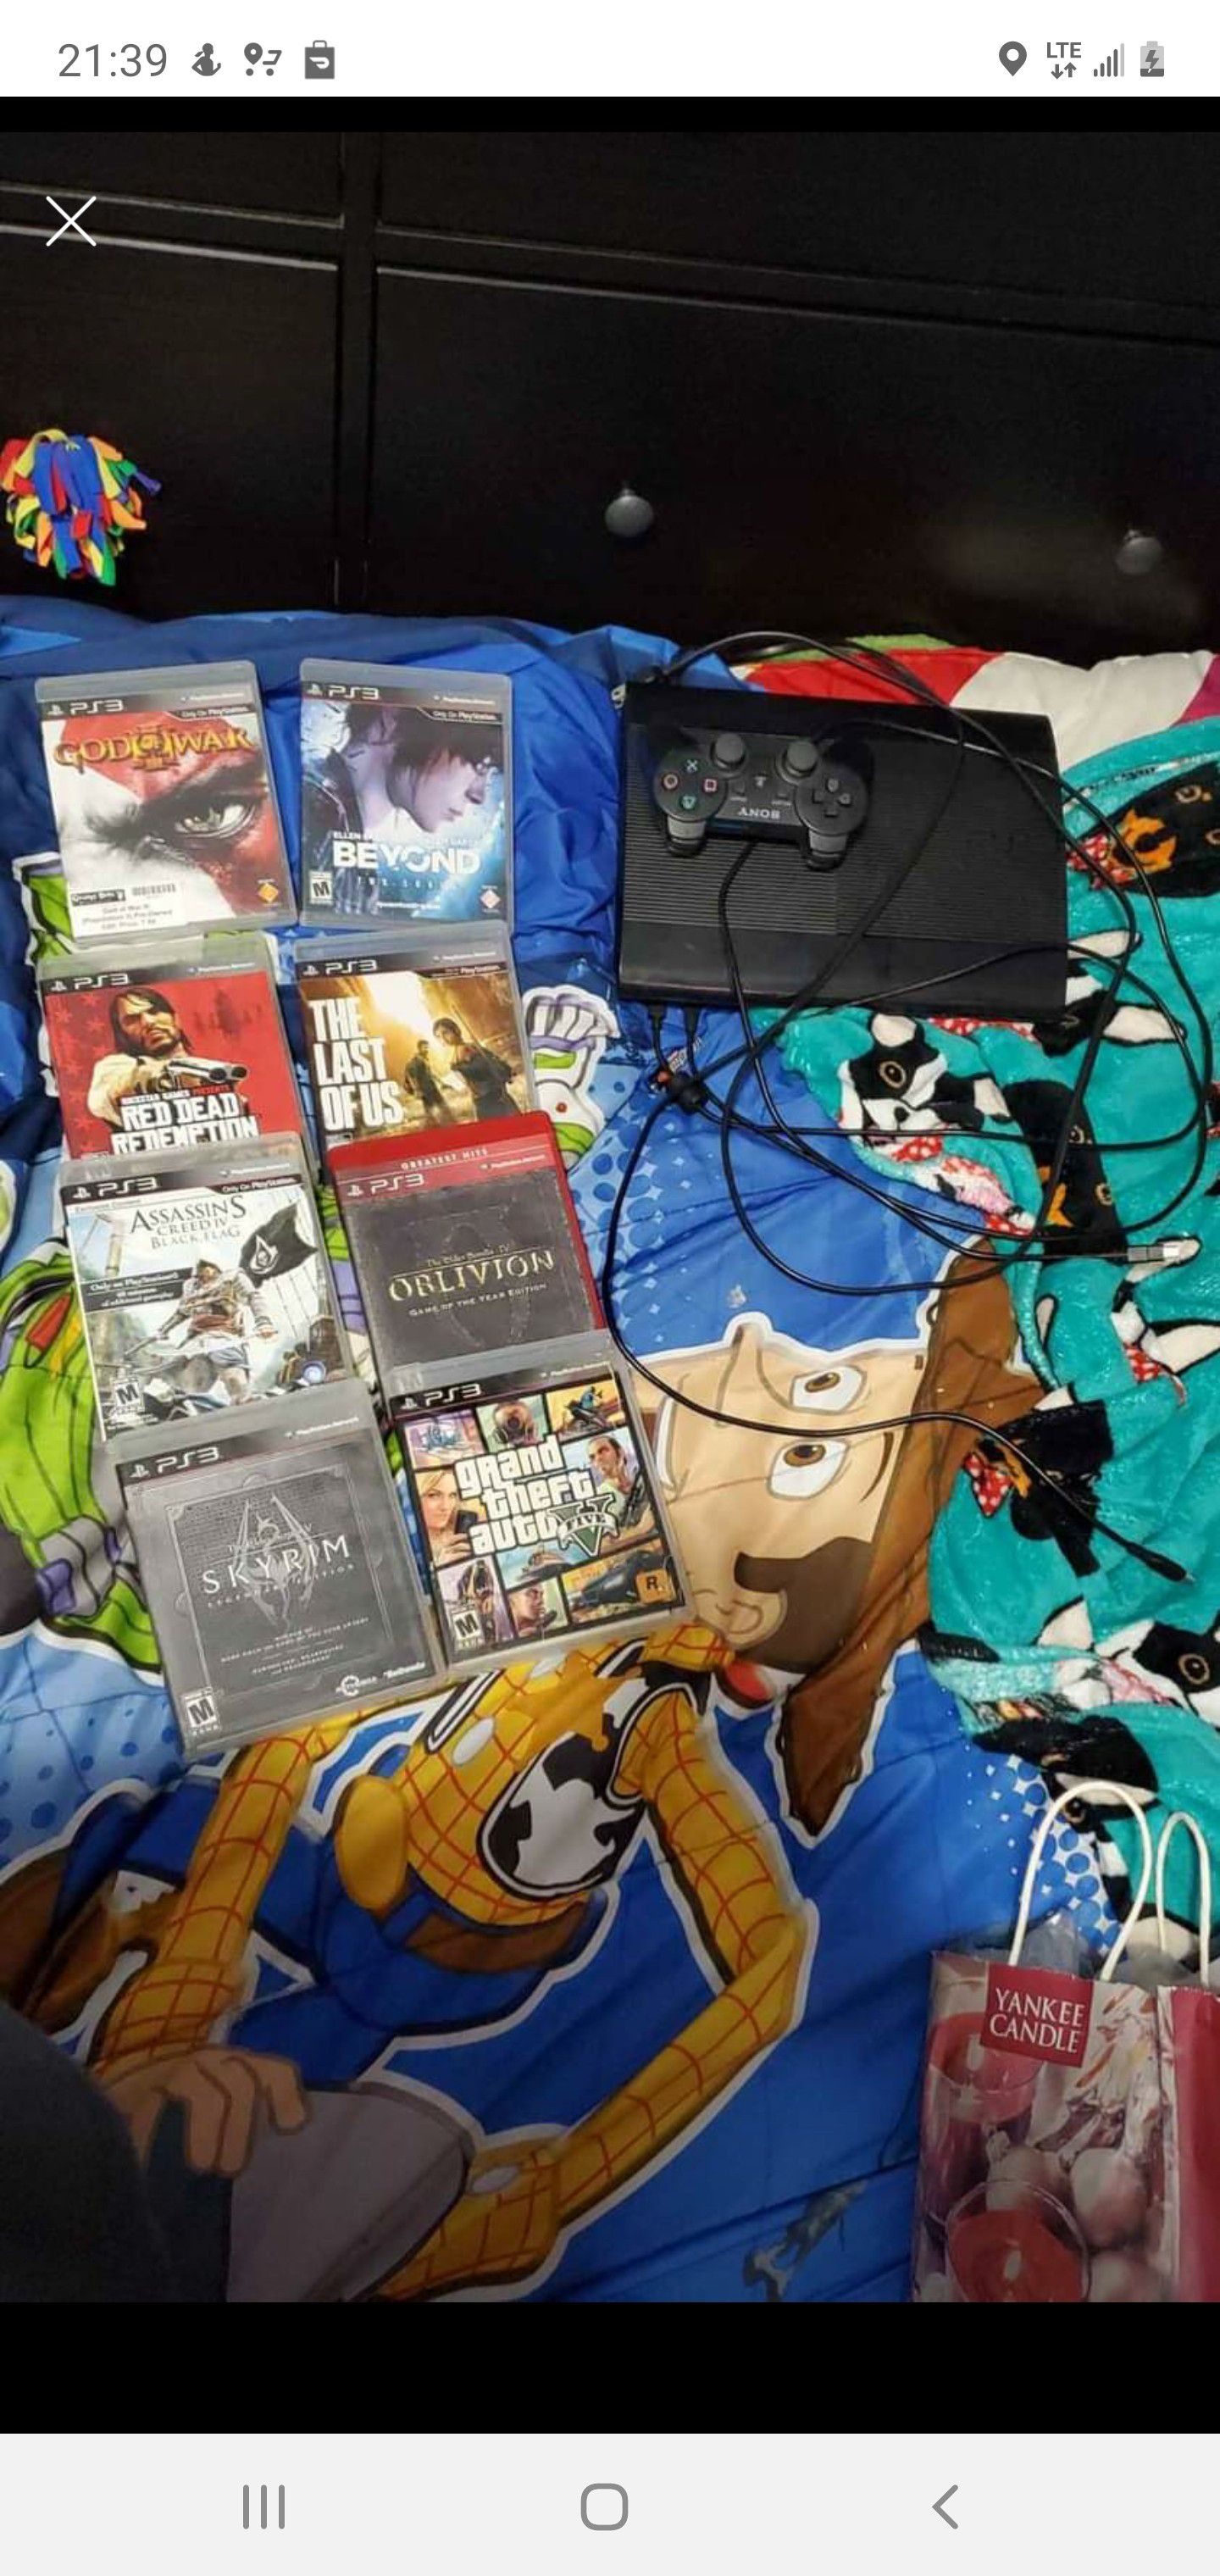 Ps3 slim with 8 games